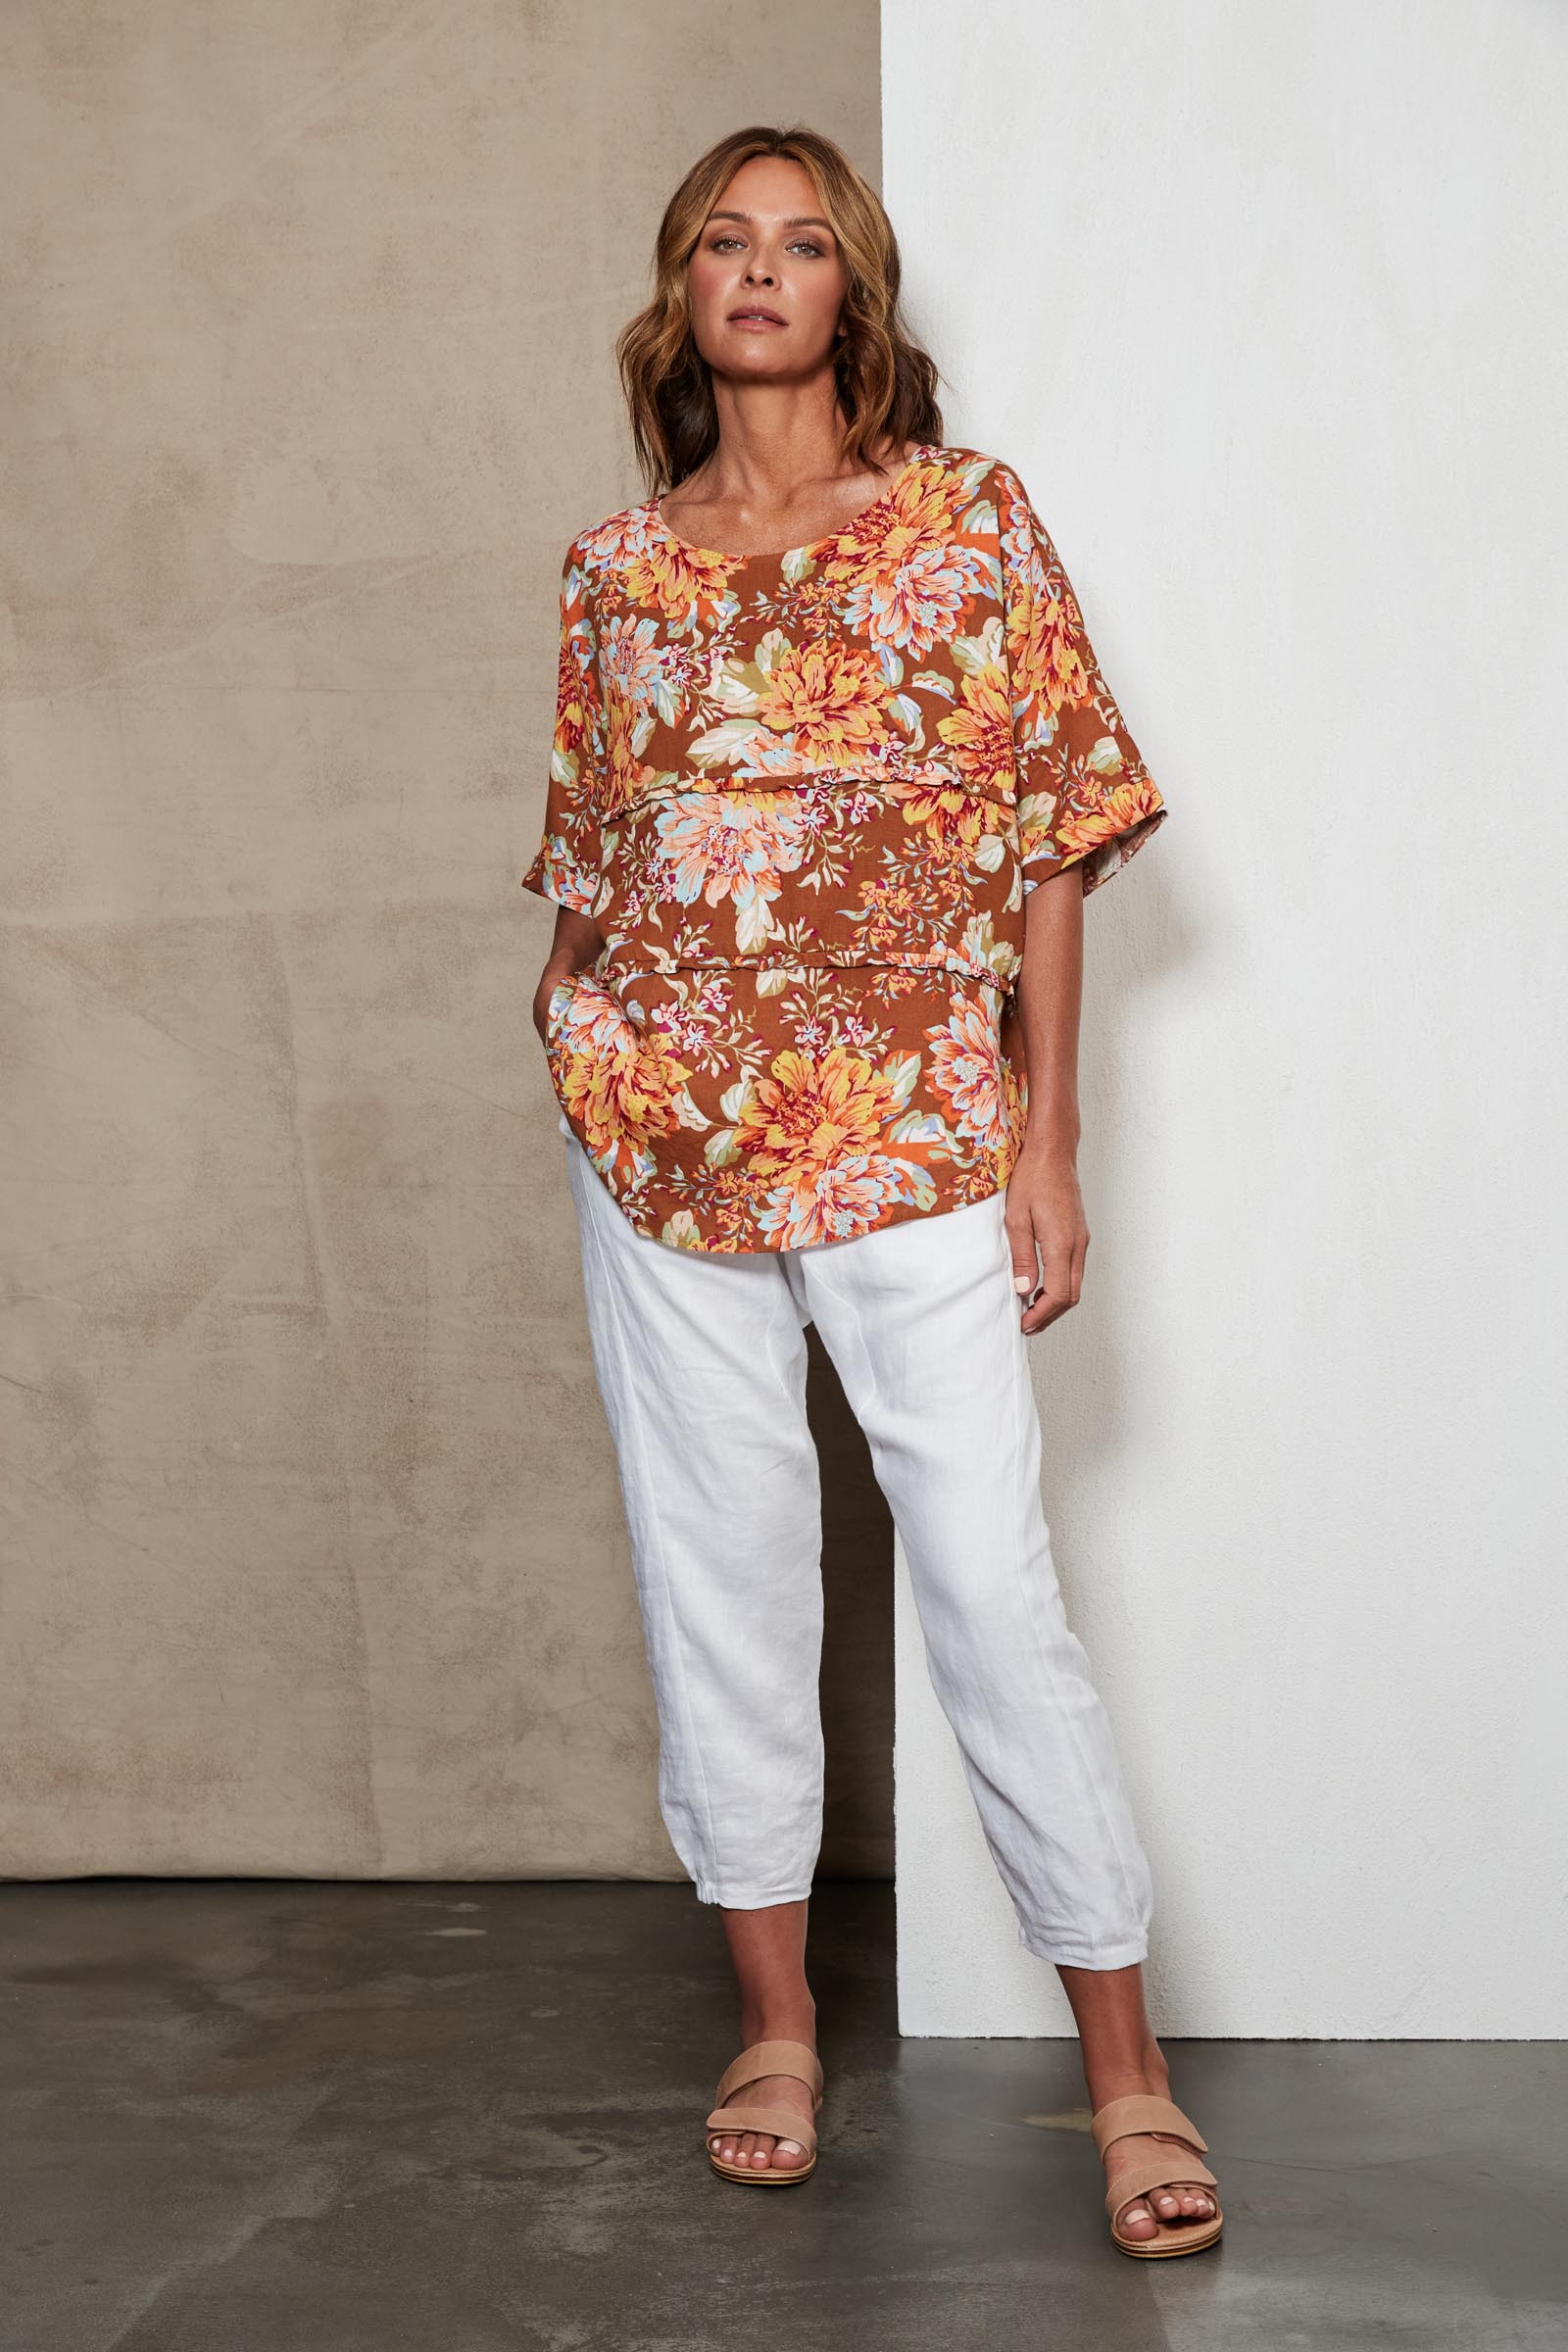 Te Amo Top - Clay Jardin - eb&ive Clothing - Top S/S One Size